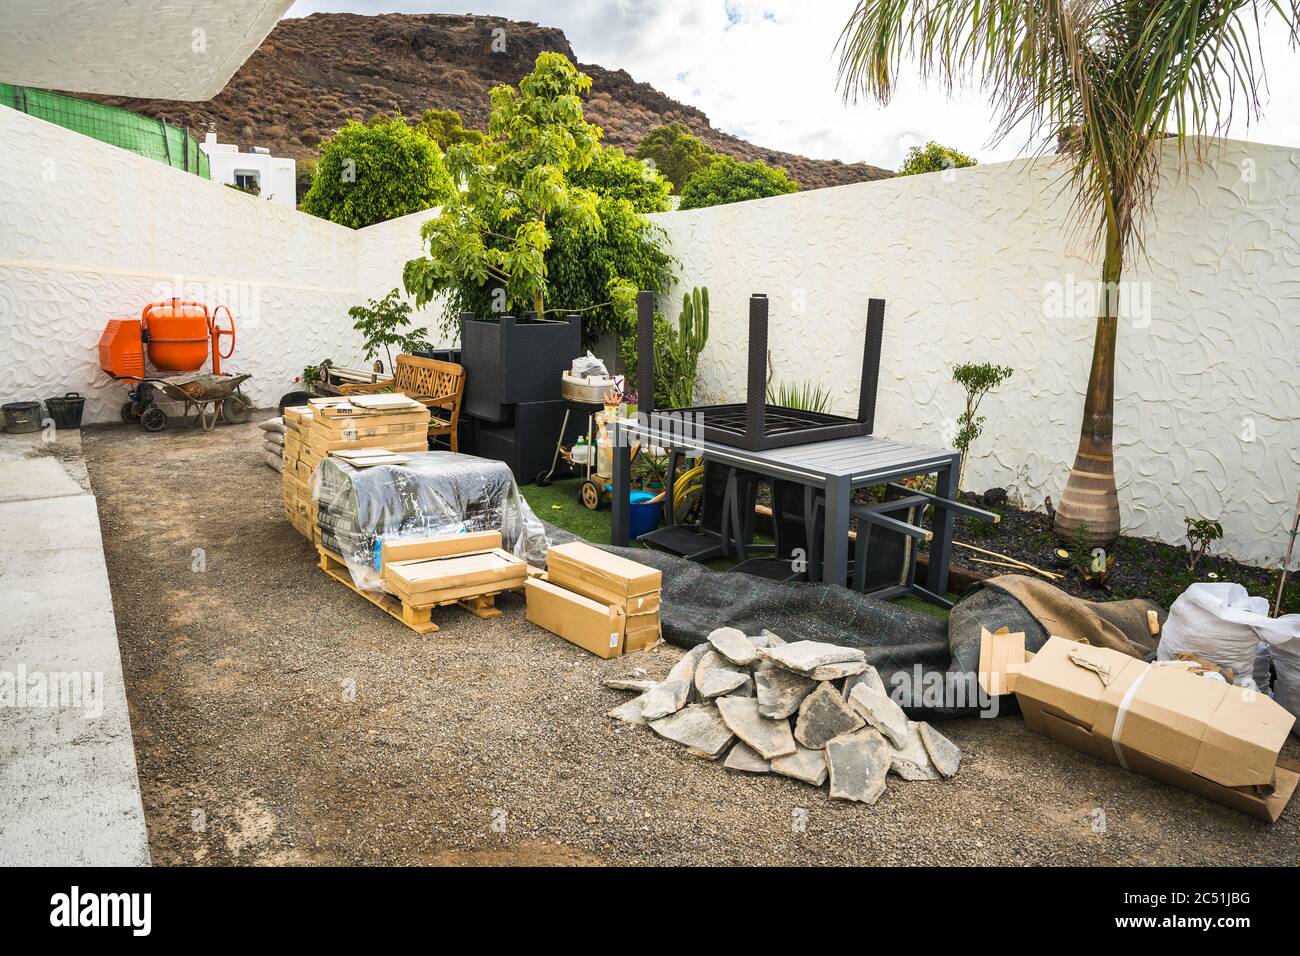 Scattered construction site materials and tools in backyard. Construction work beginning early stage ready for garden backyard renovation Stock Photo